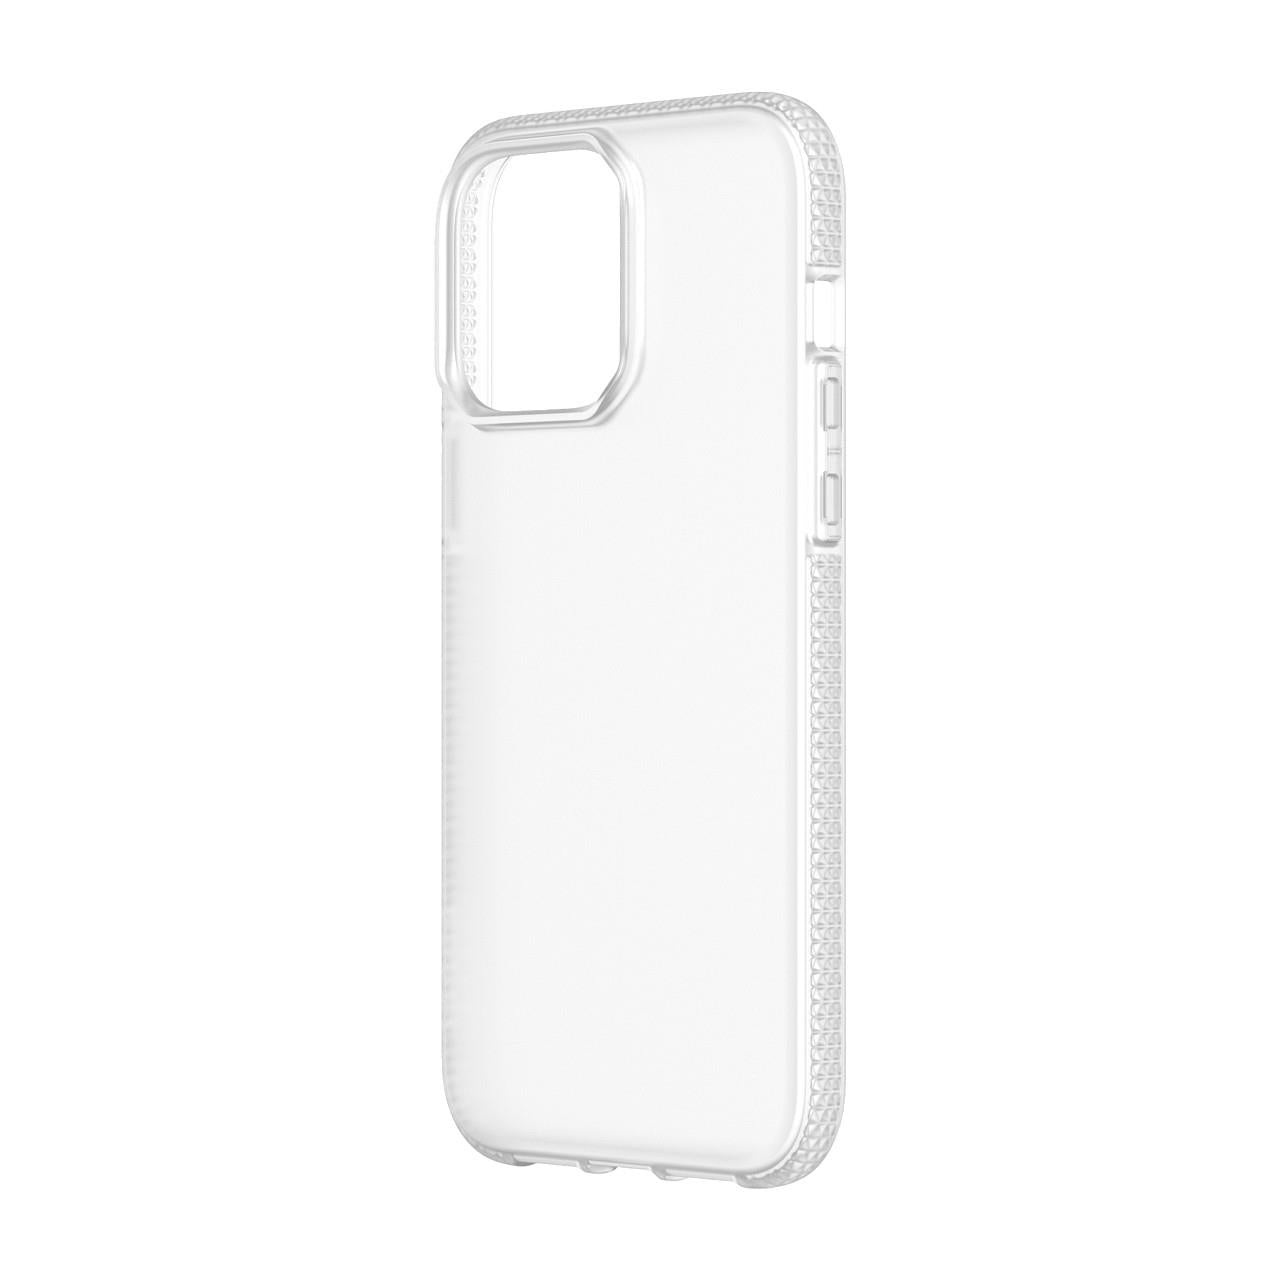 griffin survivor case for iphone 14 pro max (clear)